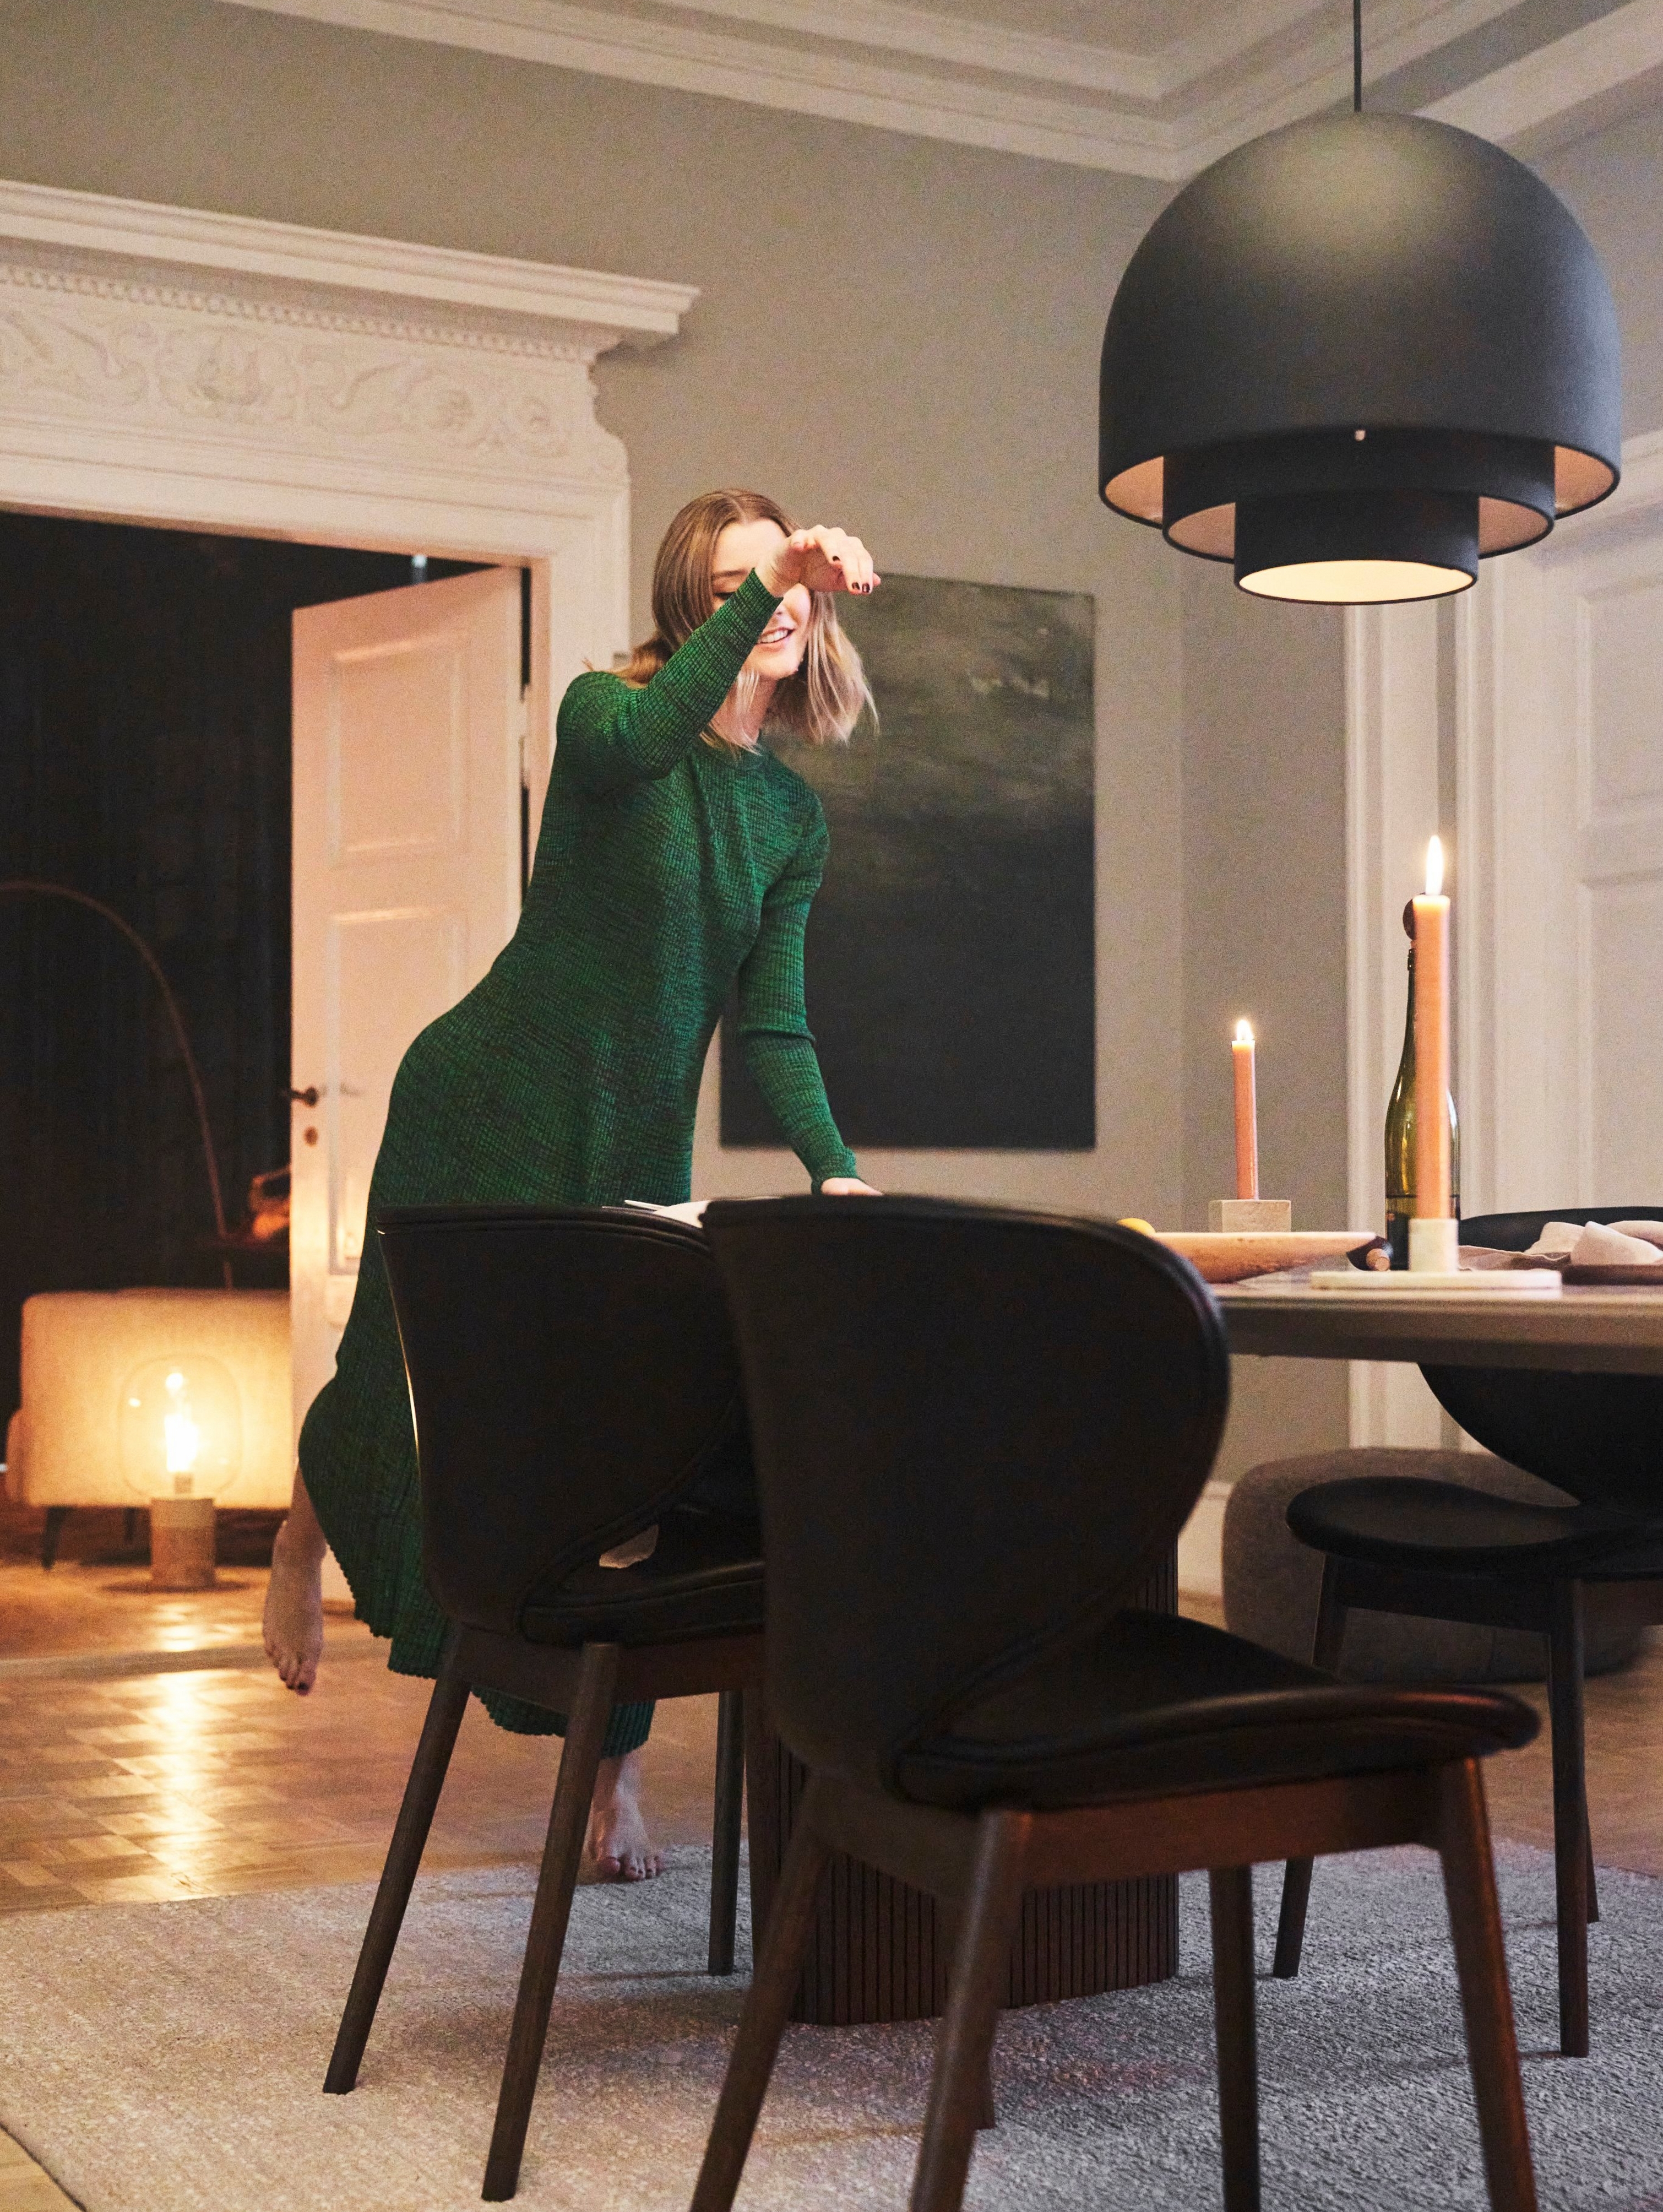 A woman dancing next to the Santiago dining table in brown ceramic